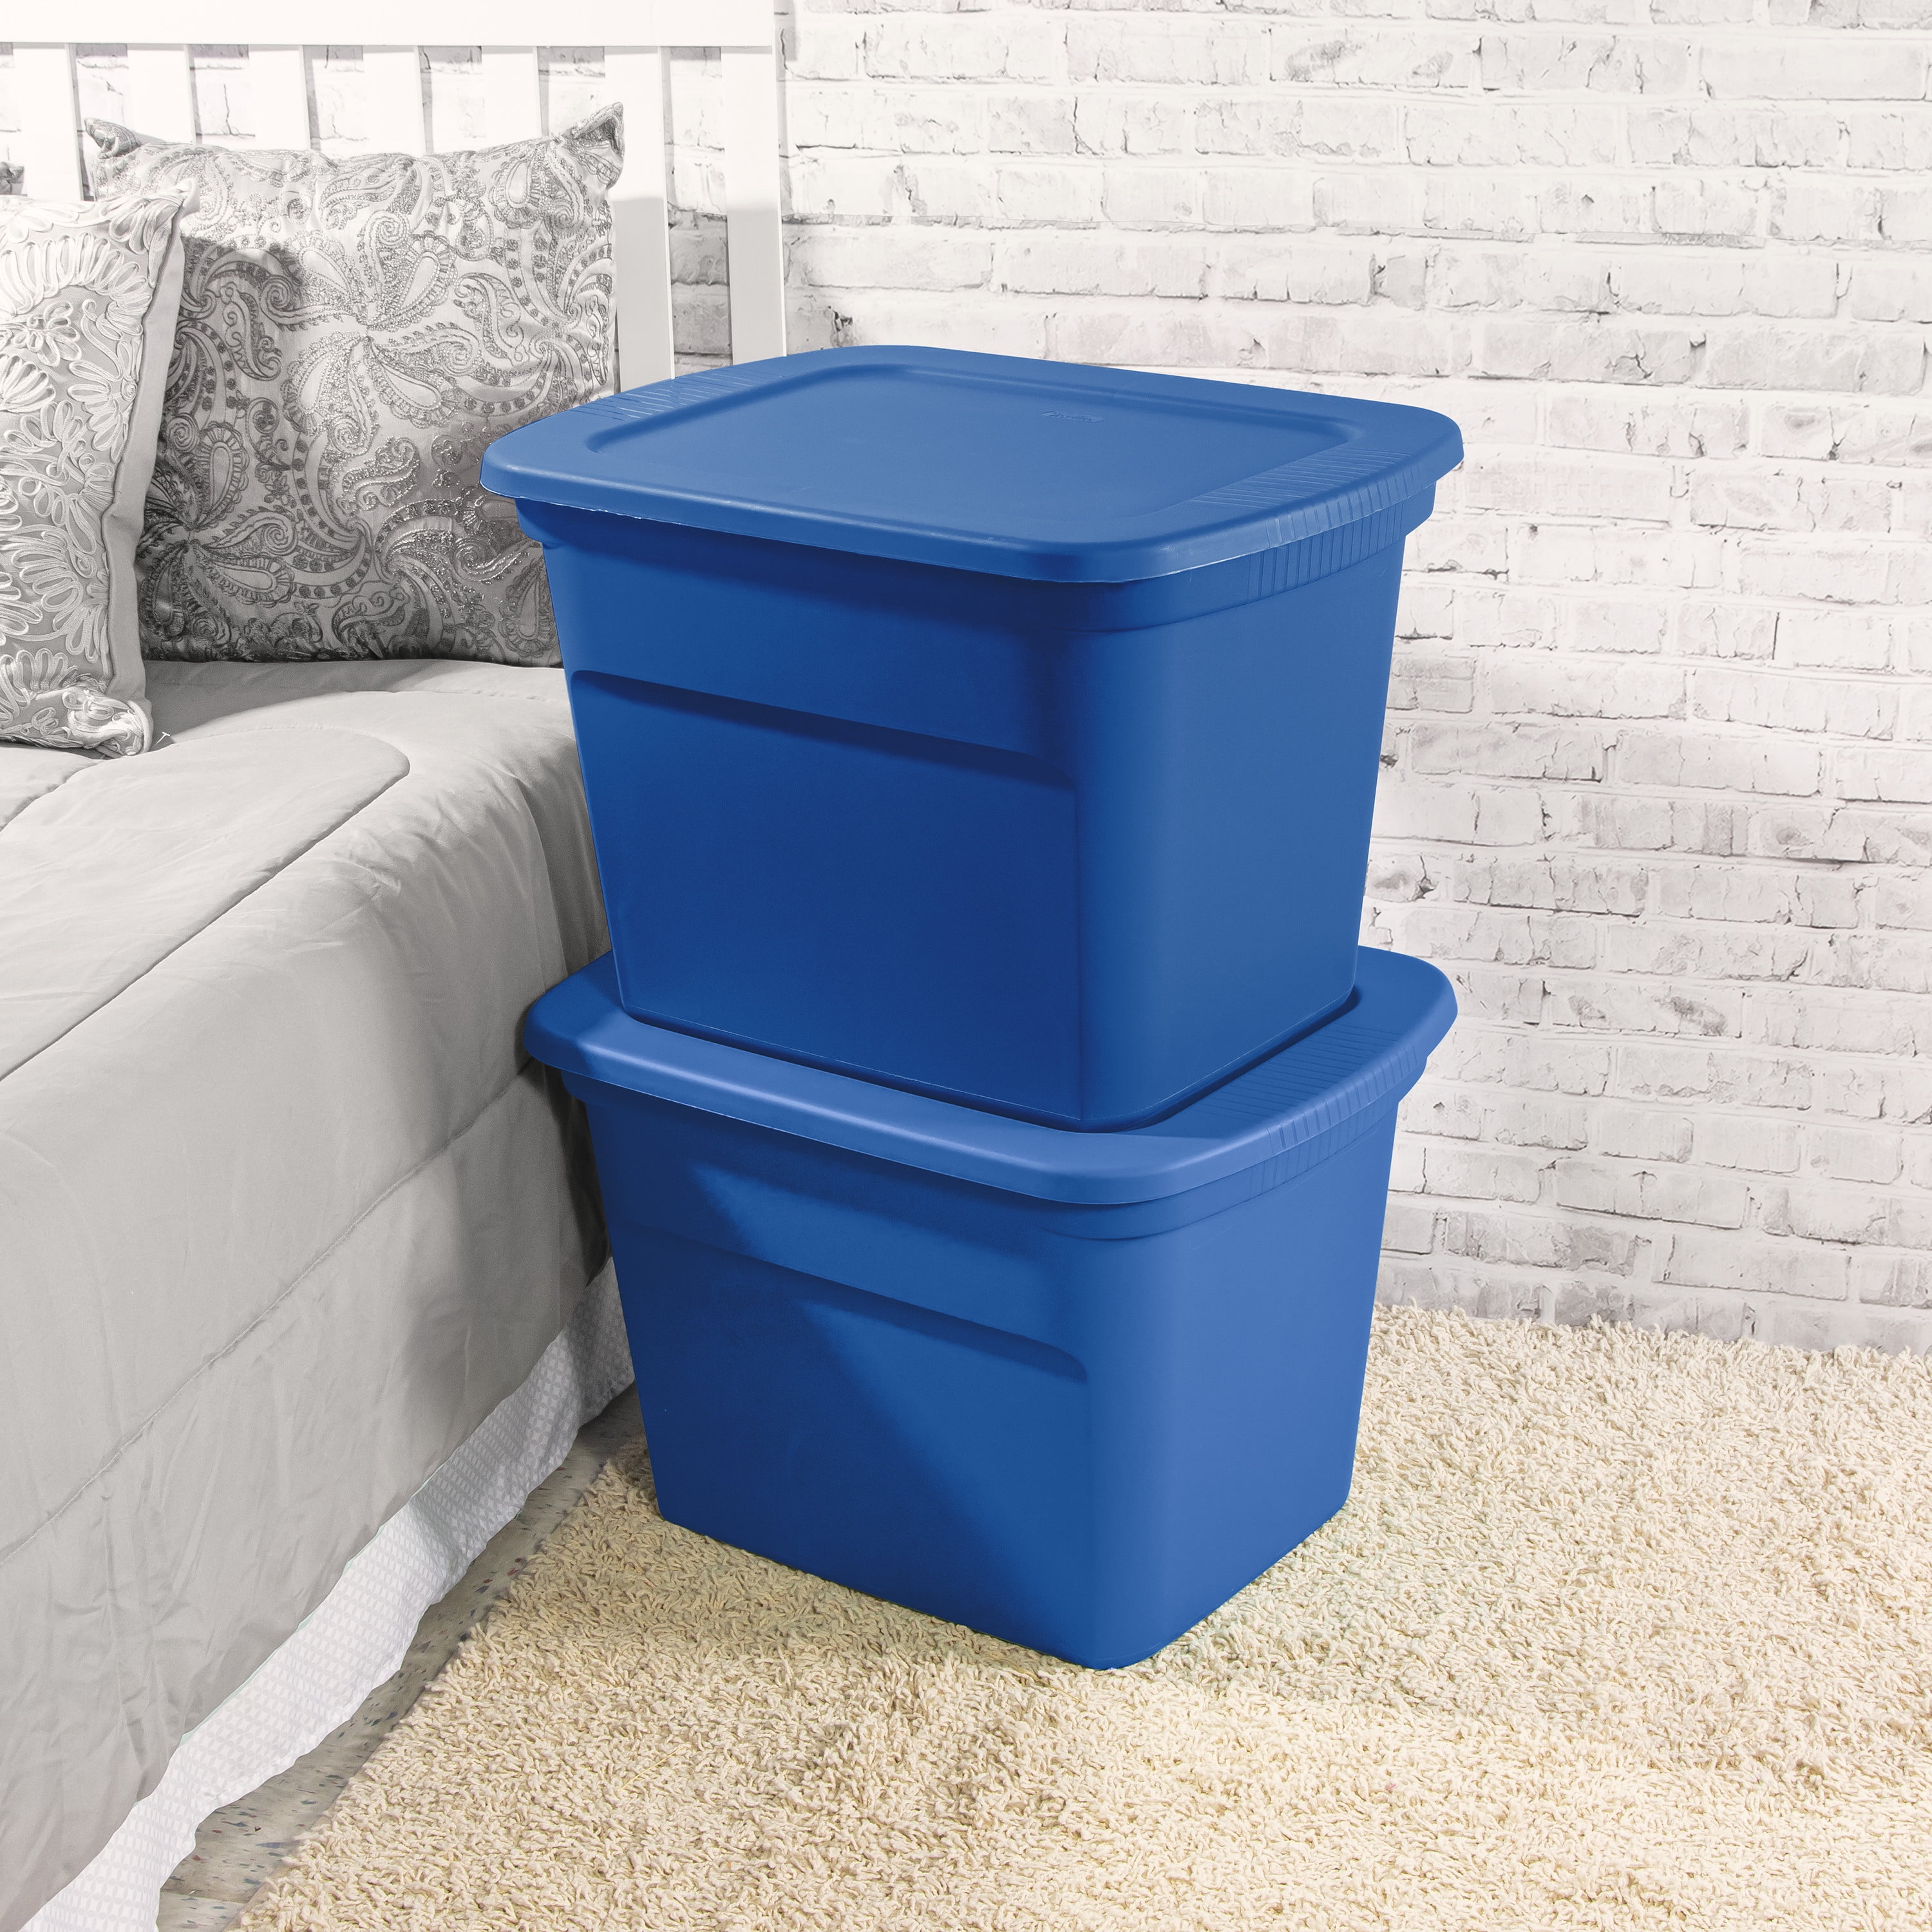 18 Gal. Plastic Durable Storage Bin with Lid in Blue (6-Pack) bin-387 - The  Home Depot